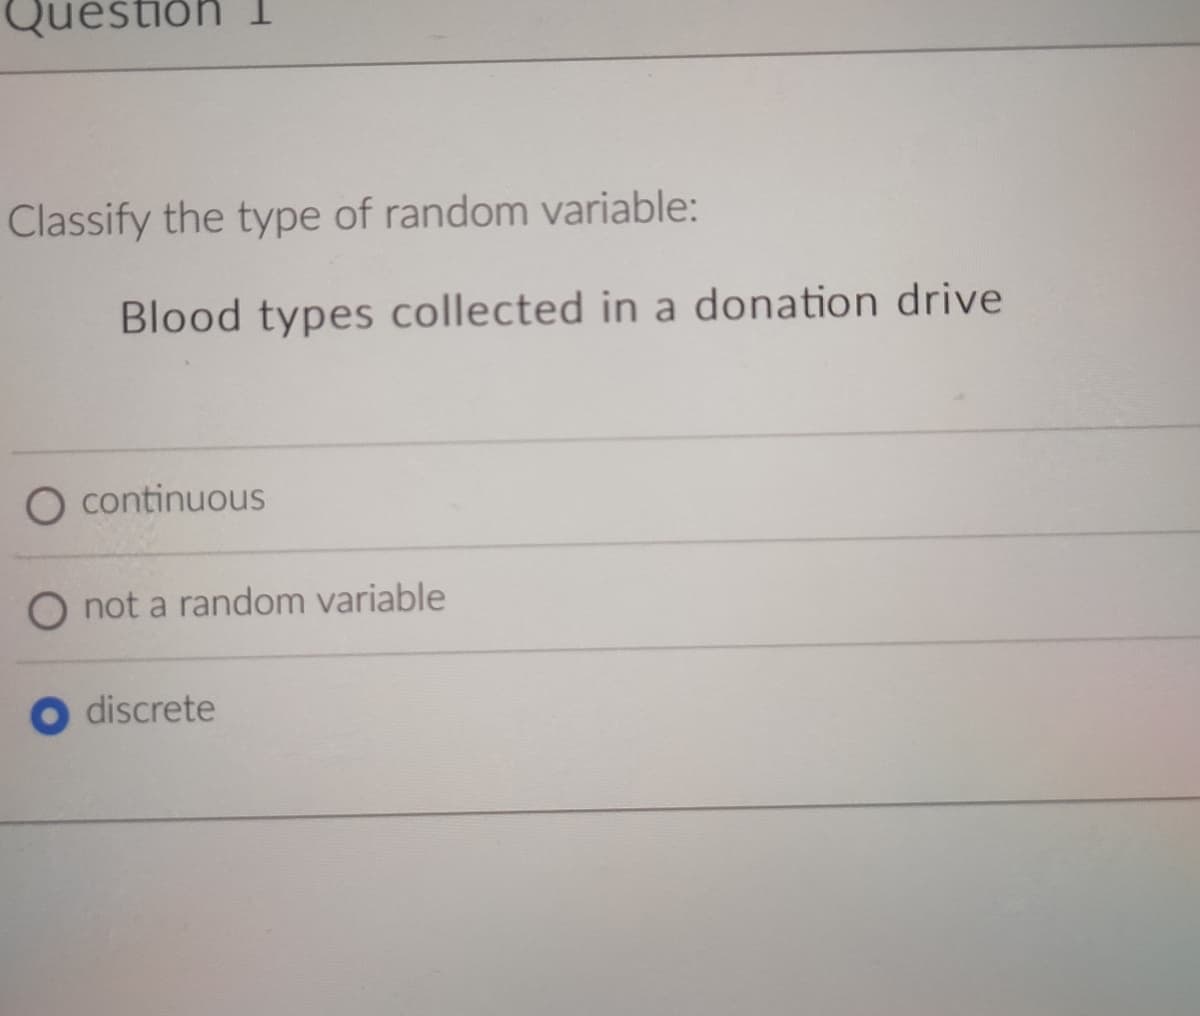 Question 1
Classify the type of random variable:
Blood types collected in a donation drive
O continuous
O not a random variable
discrete
